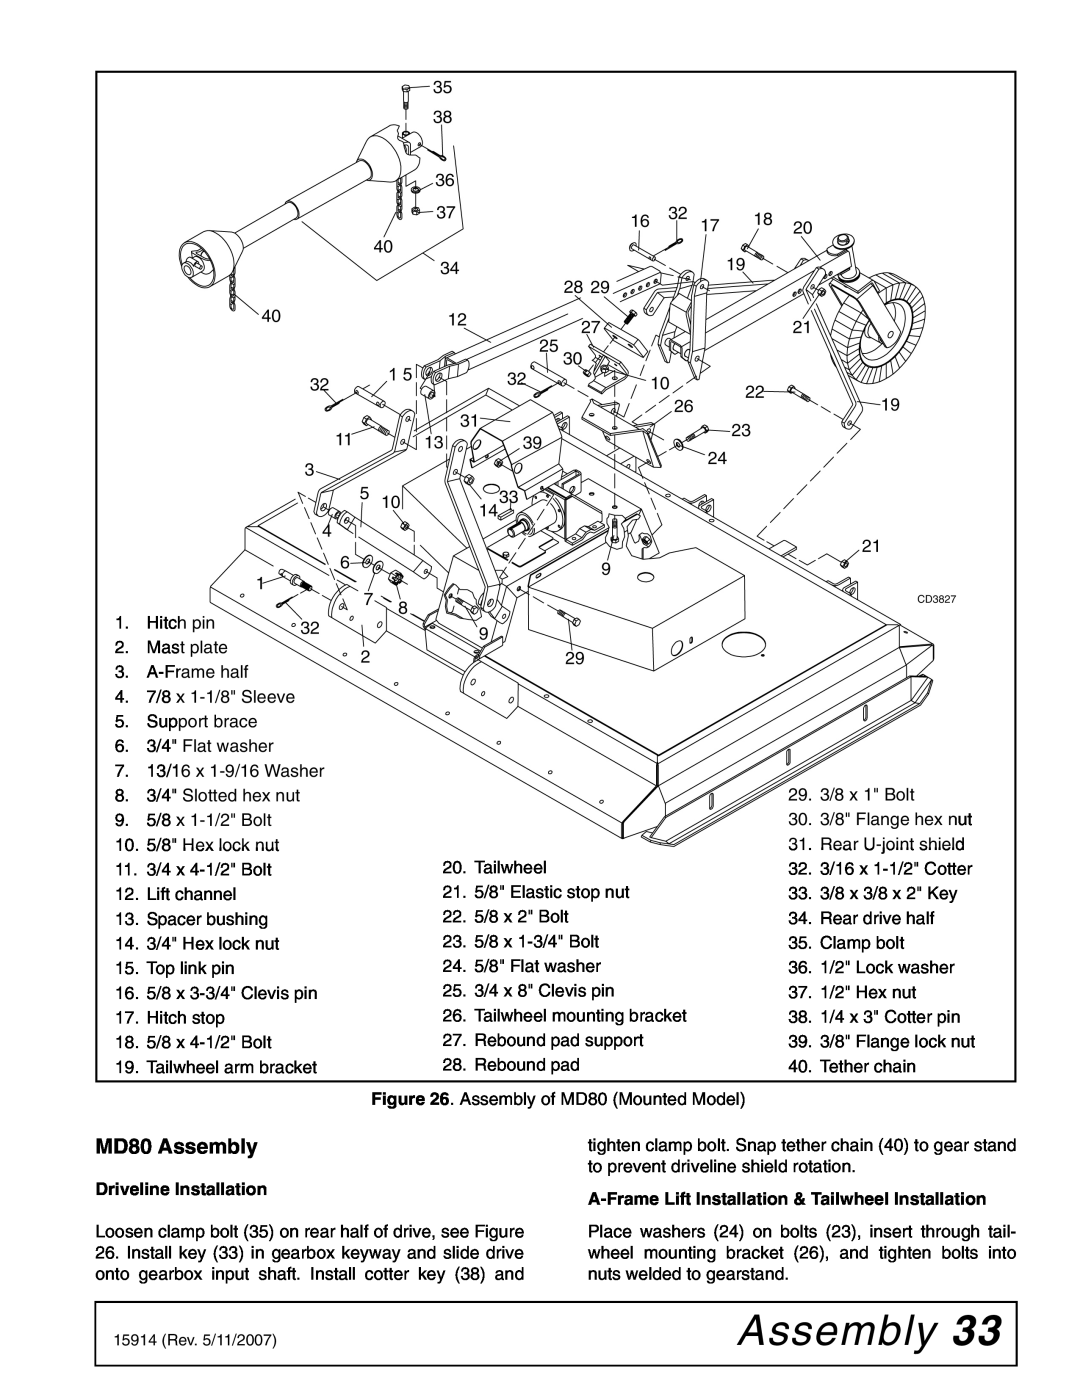 Woods Equipment MD80-2 MD80 Assembly, Driveline Installation, A-FrameLift Installation & Tailwheel Installation 